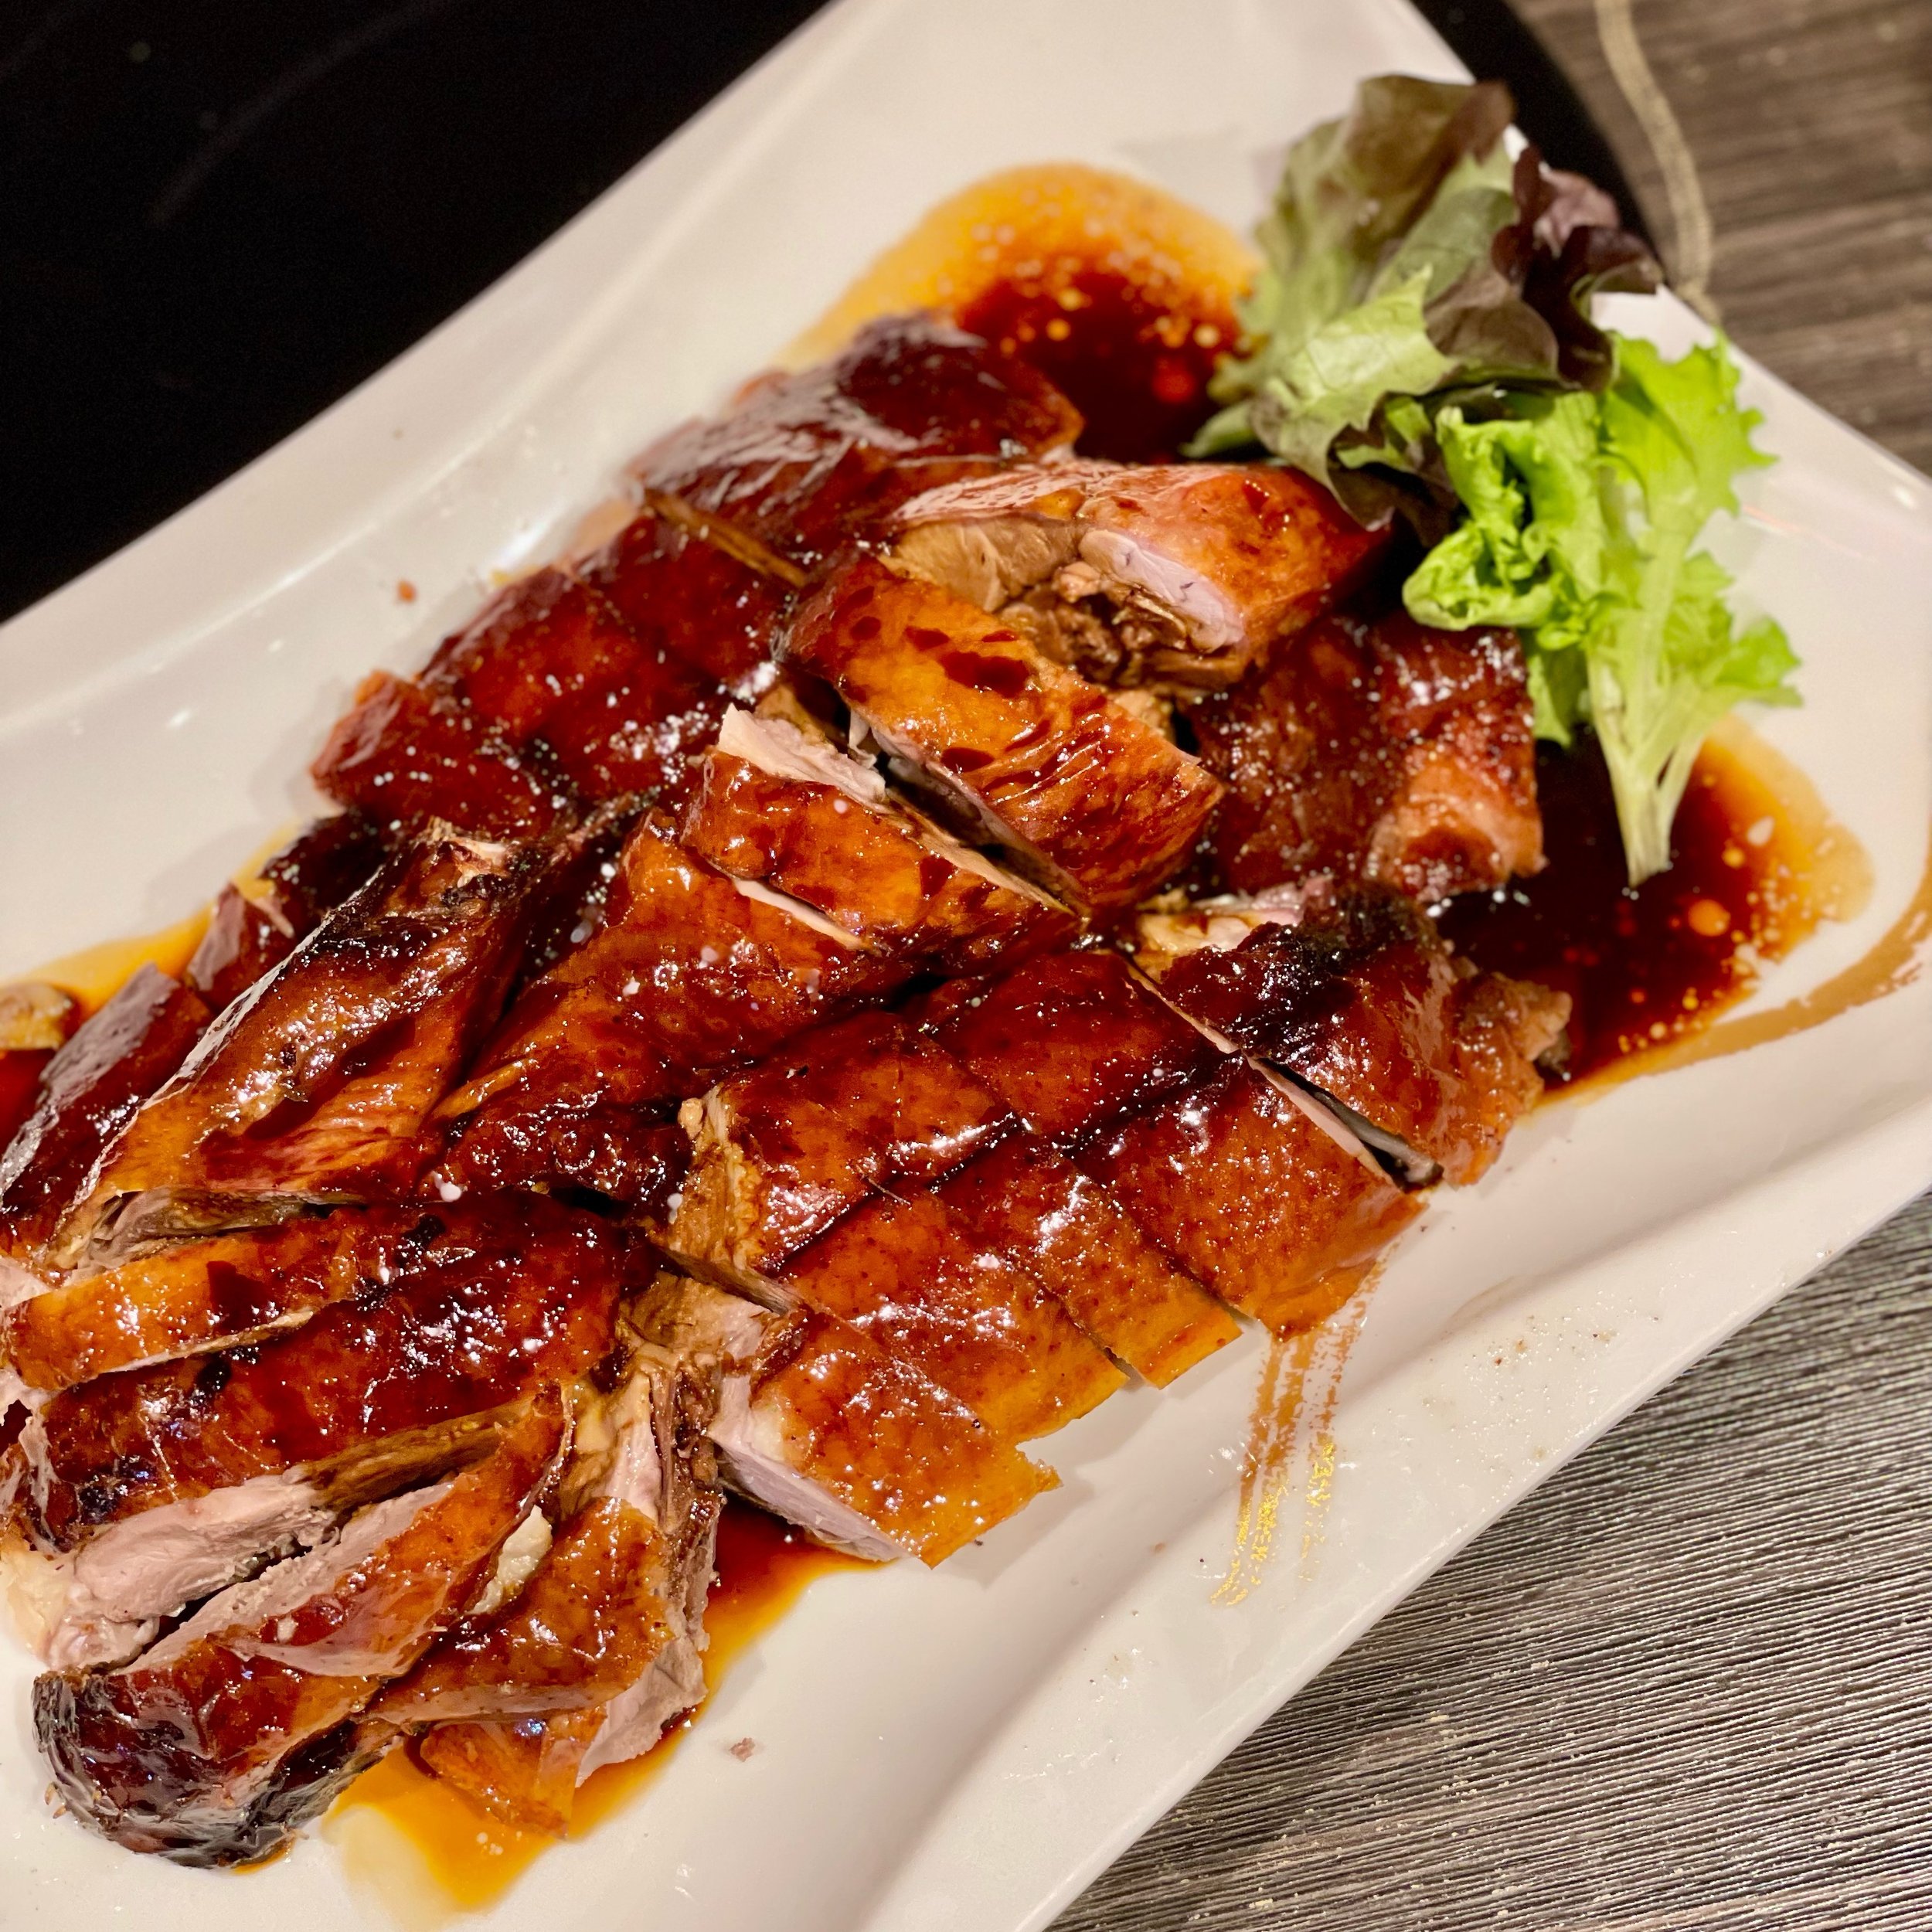 Our all-time classic, the Golden Dragon Roast Duck, has never disappointed you! 🔥

@bangbangoriental @chinatownlondon 

#GoldenDragon #chinesefood #londonfood #eat #dinner #chinatown #chinatownlondon #chineseresturant #bangbangoriental #bangbangorie